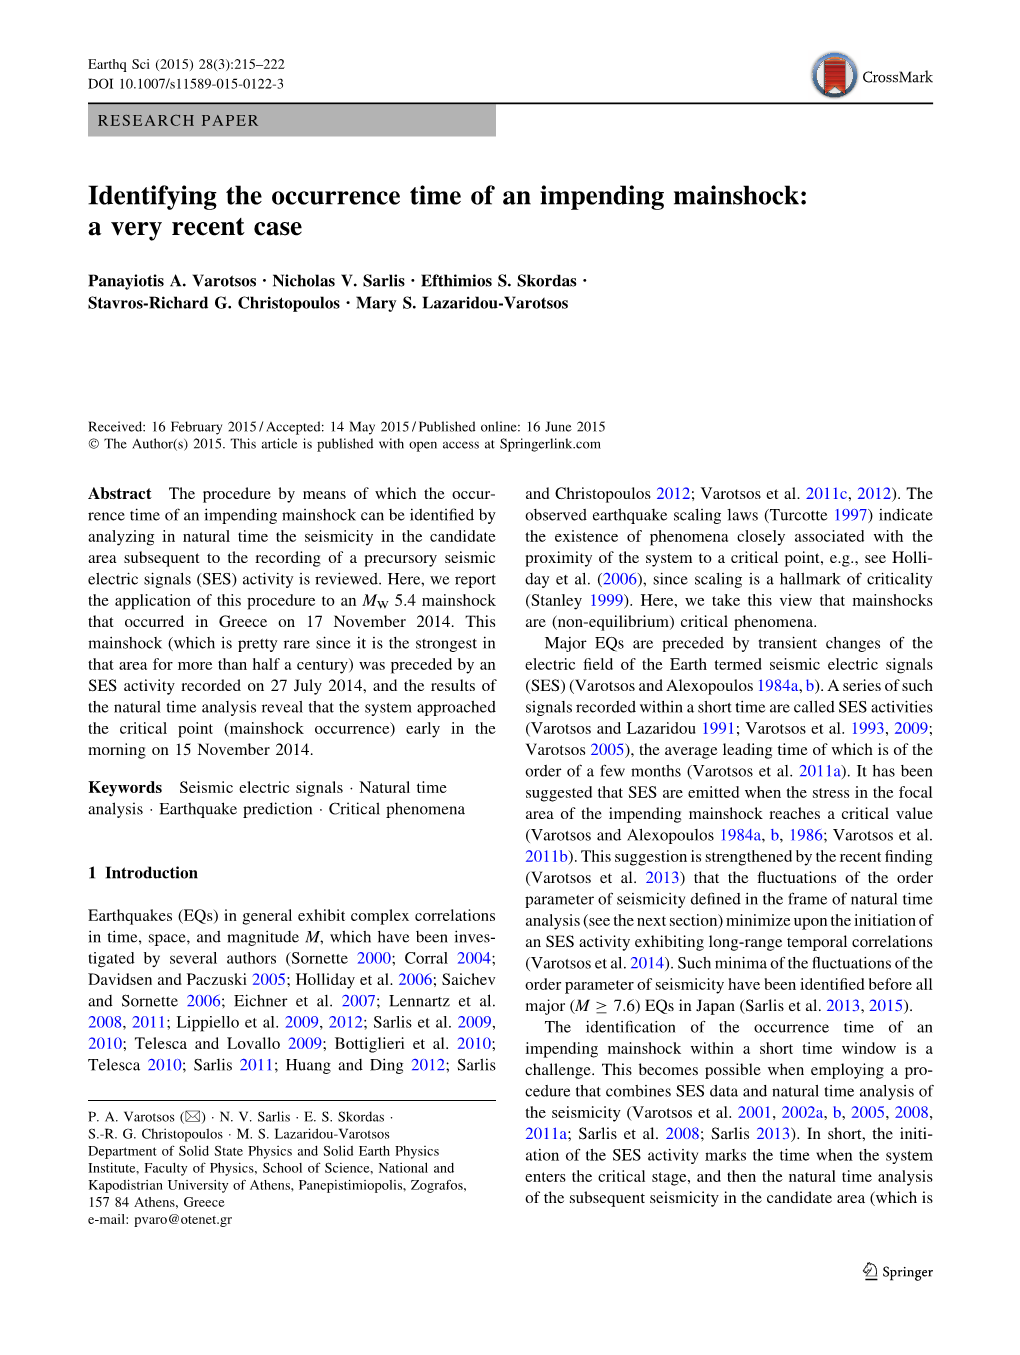 Identifying the Occurrence Time of an Impending Mainshock: a Very Recent Case